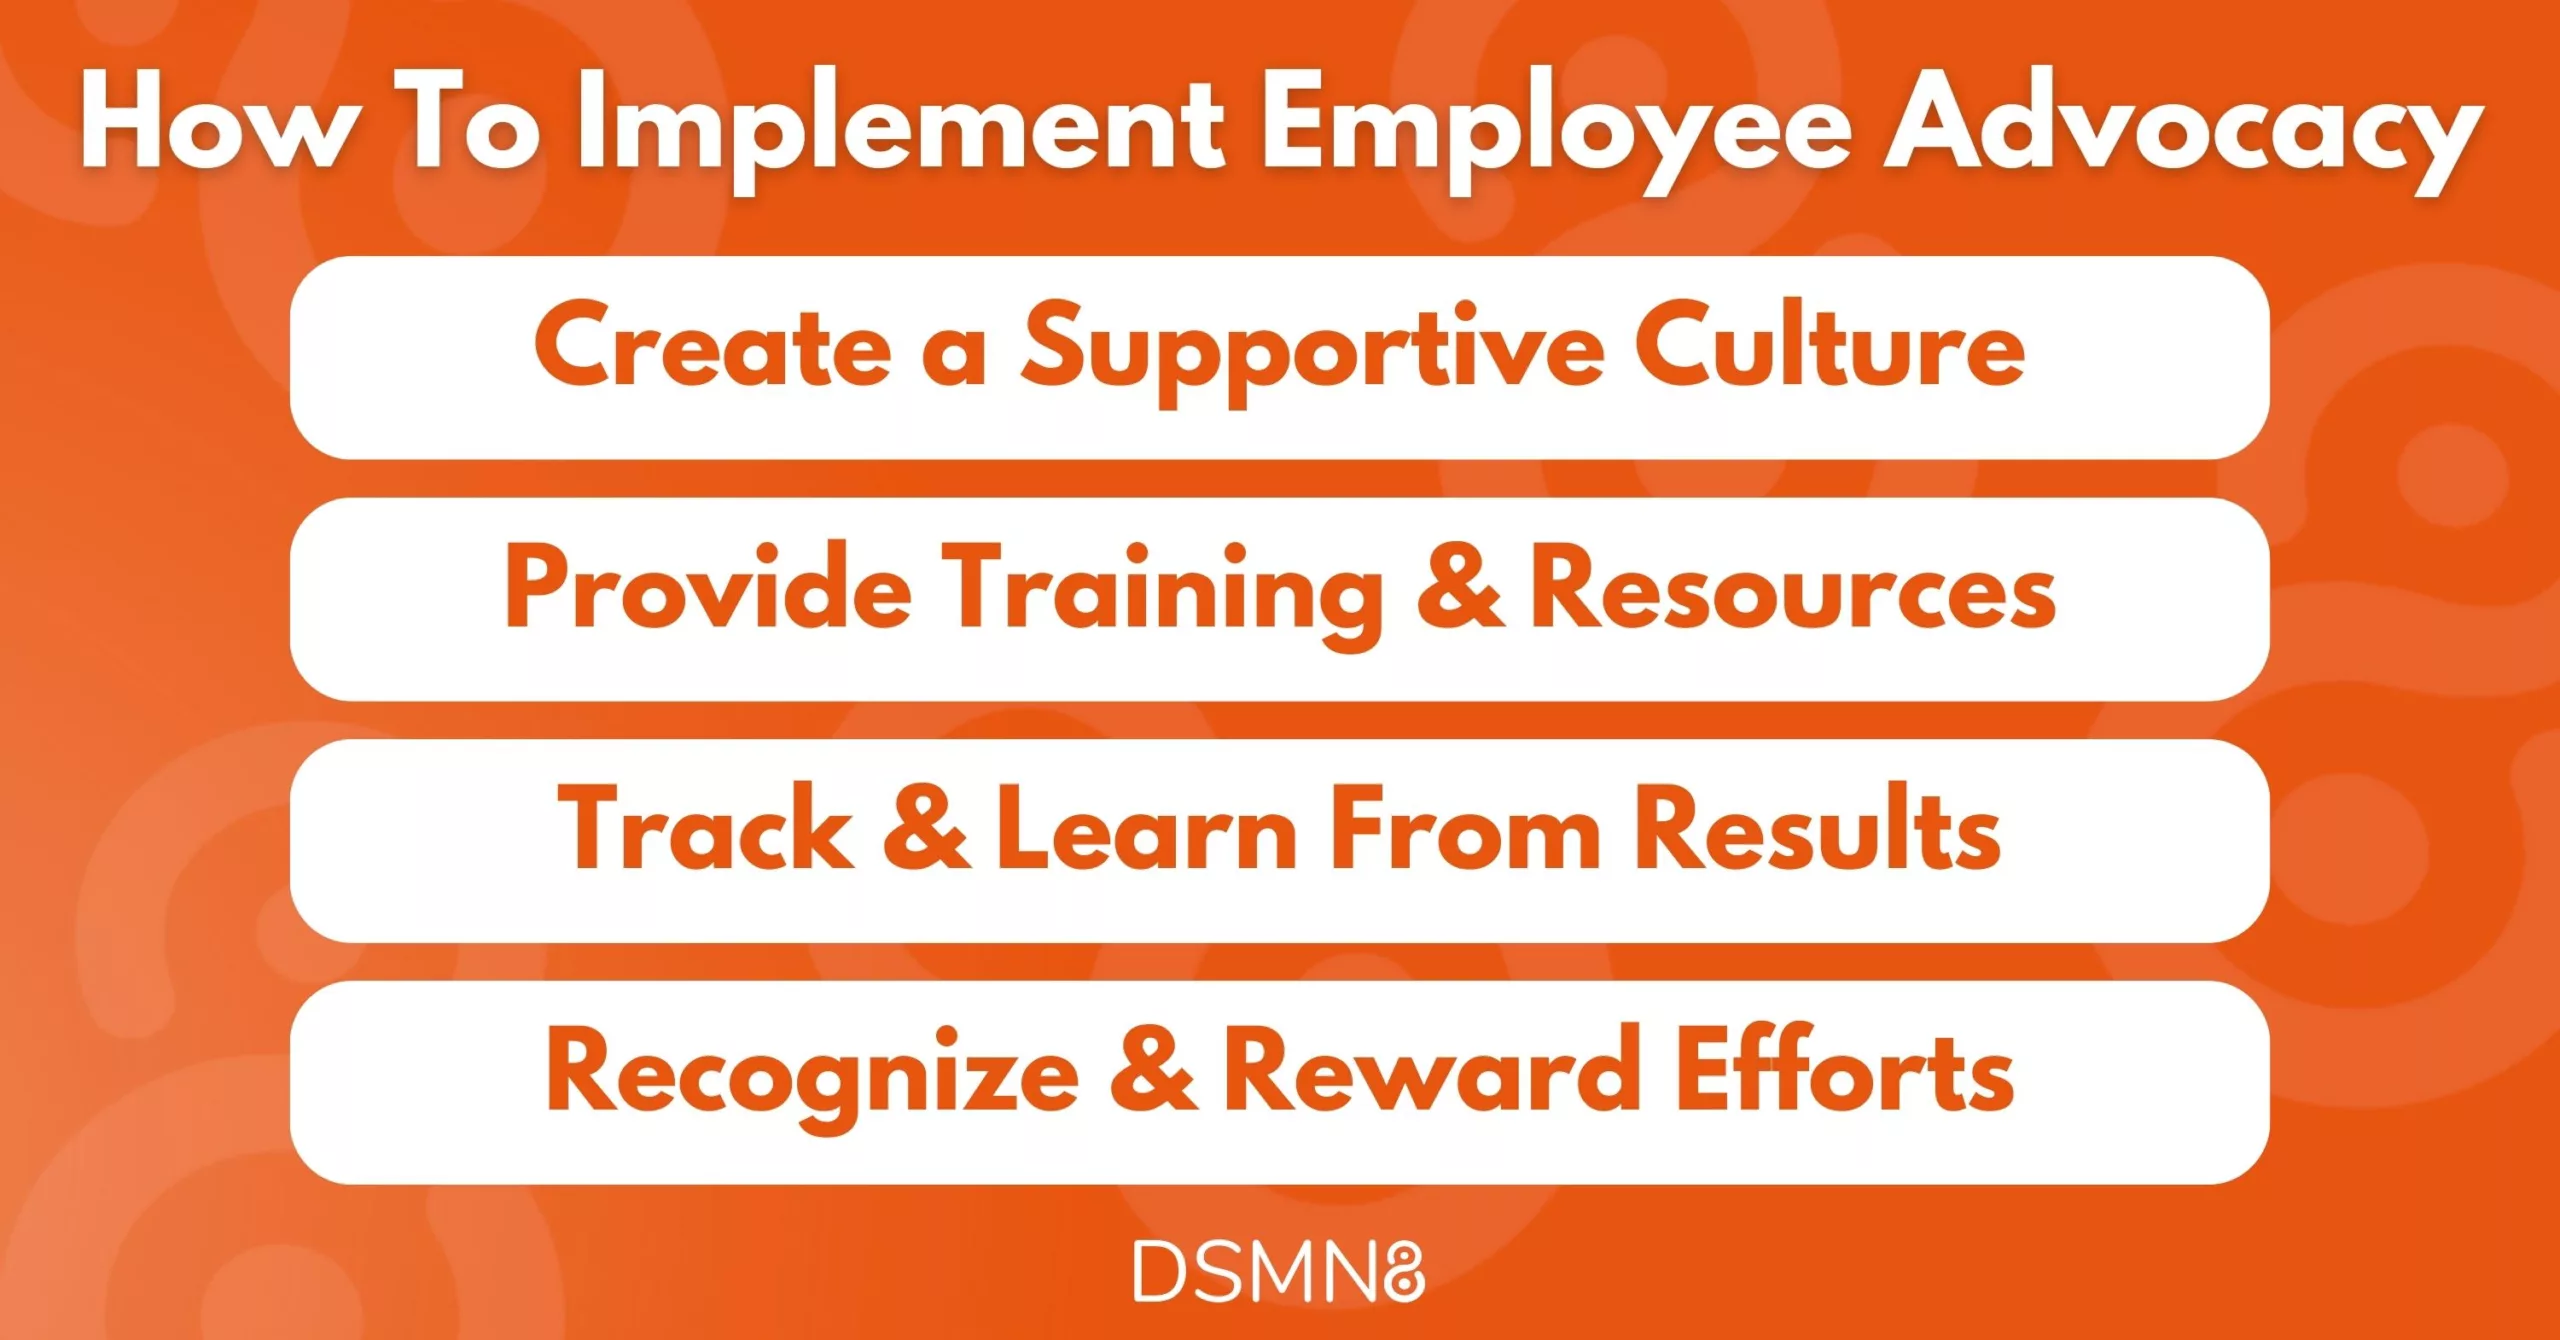 How to implement employee advocacy